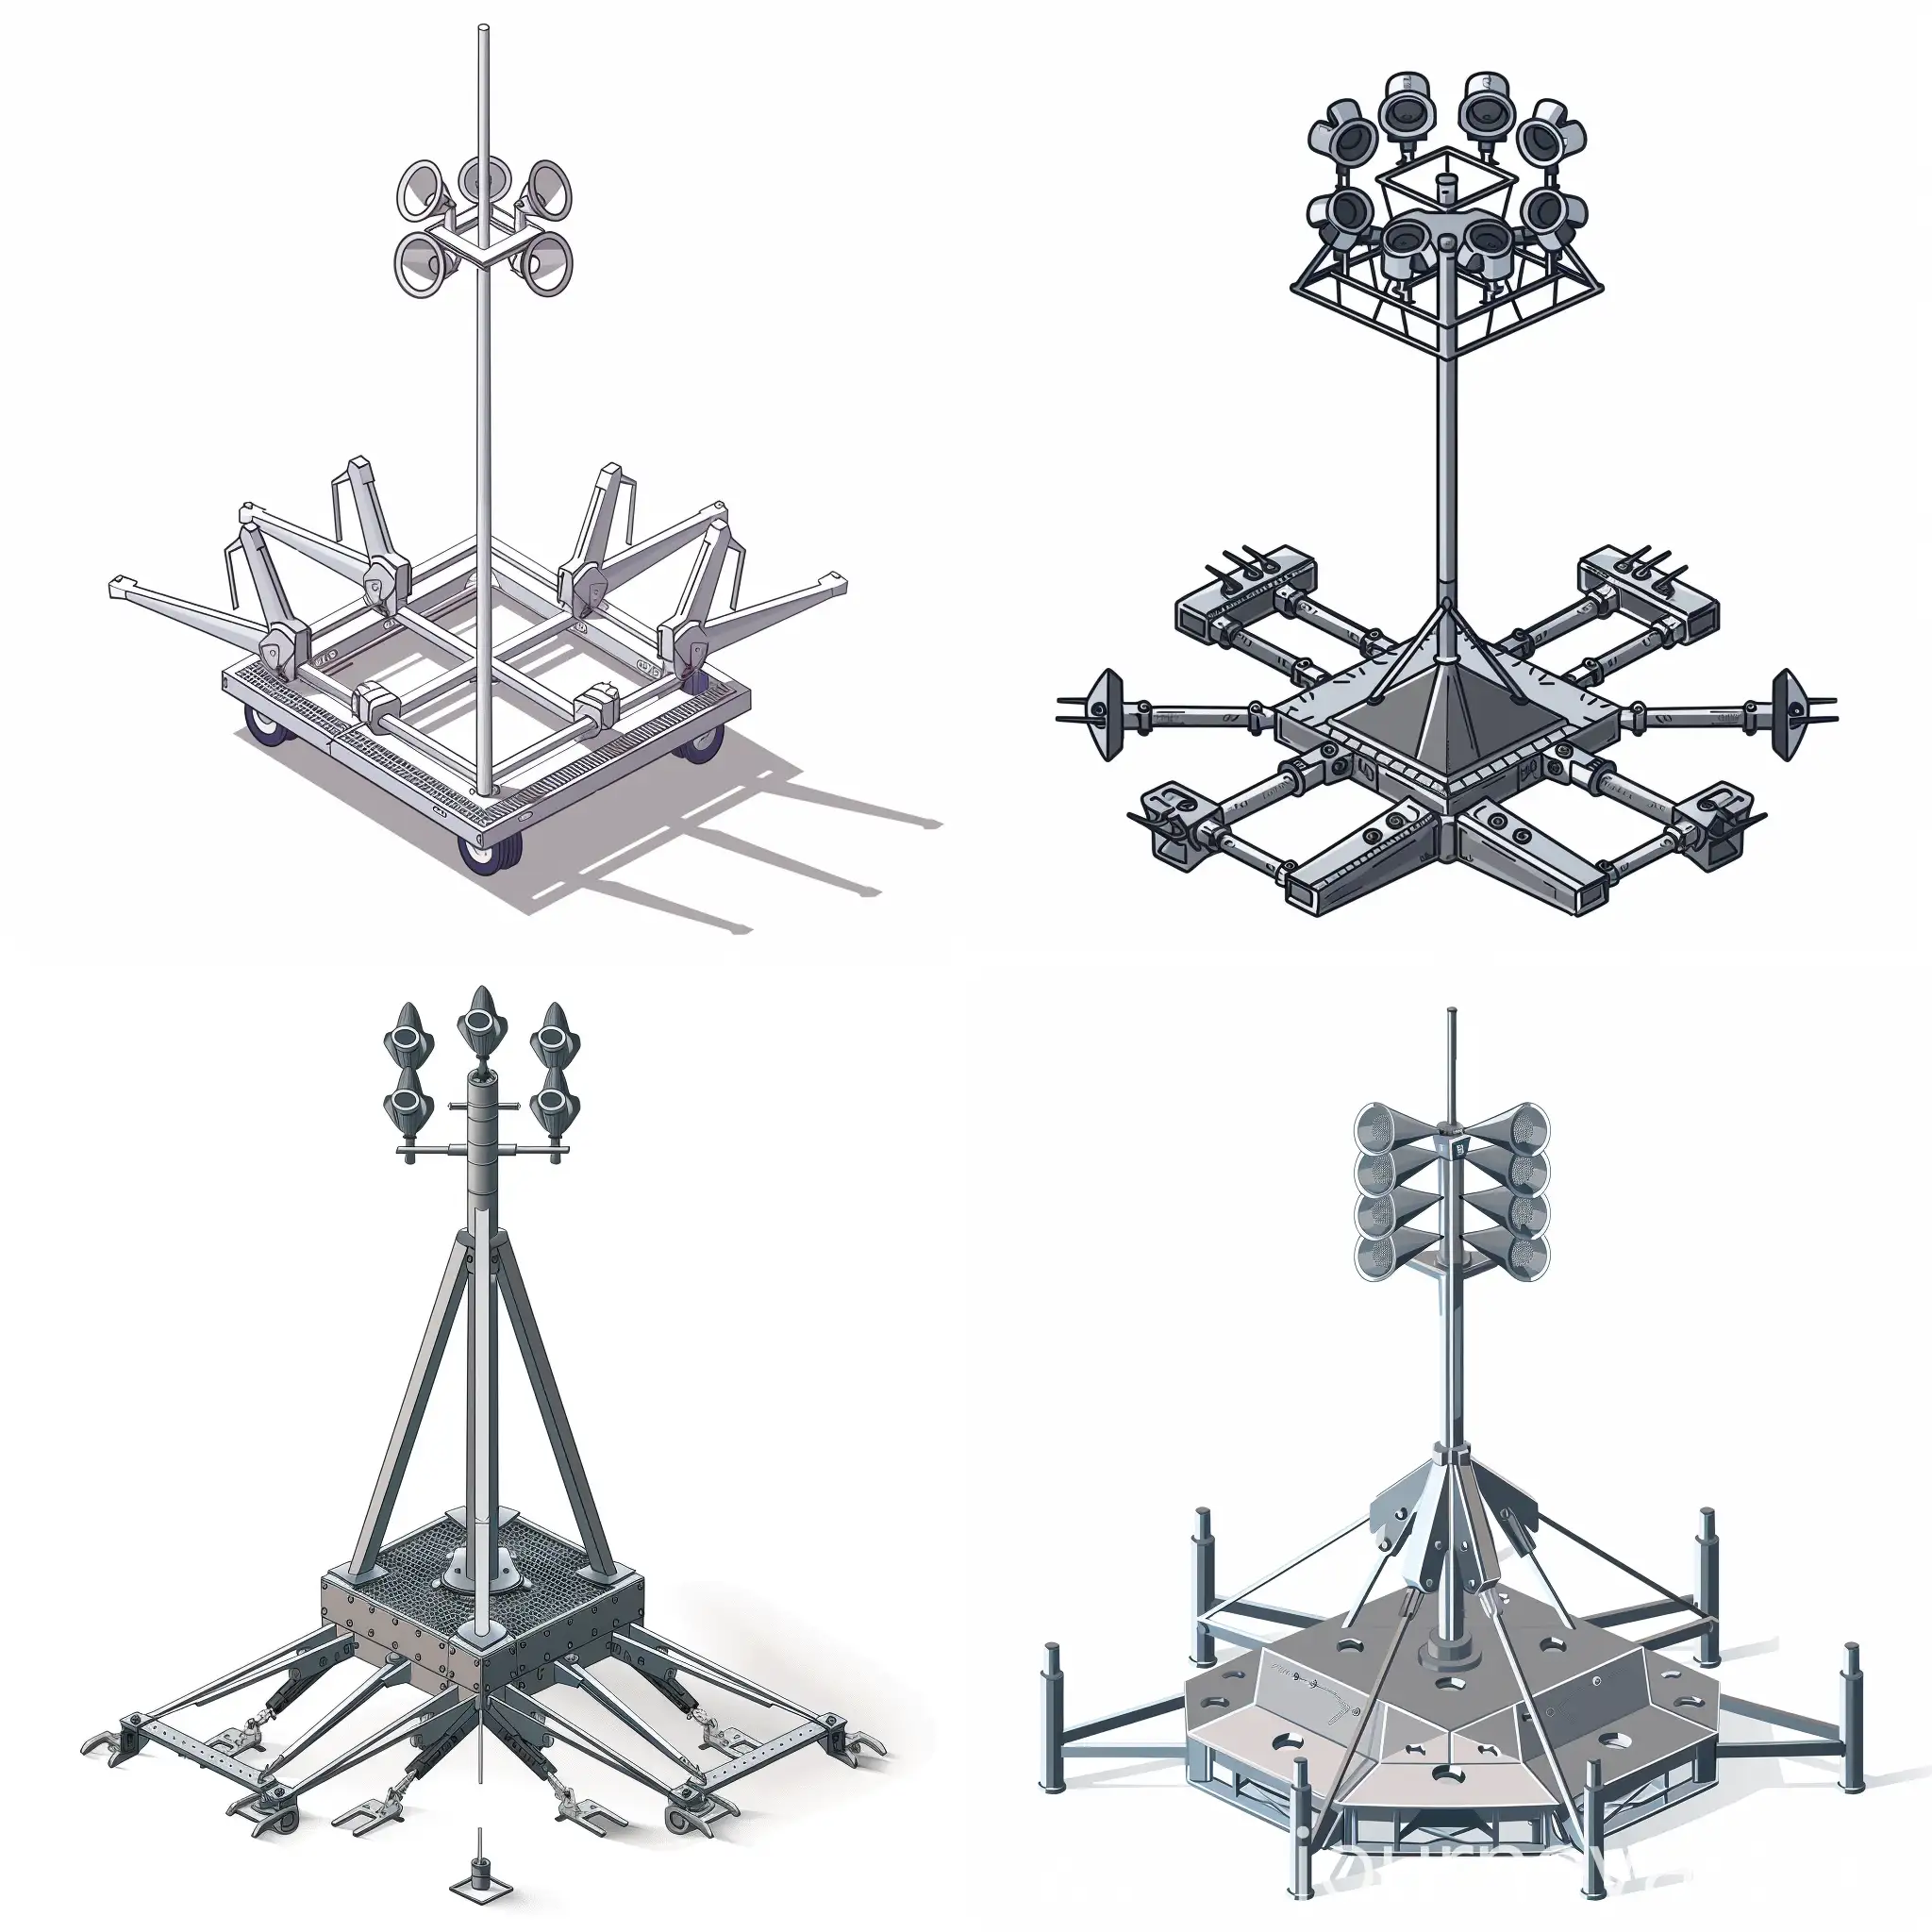 small minimalist simple metallic structure tow dolly alike  with six metallic arms around  for ground support with one pole structure in the center like a mast with a vertical arrangement of 6 doble sirens horns facing the same direction on the top of the pole with a triangular front for hauling attachment tow platform, stencil for Visio, simple minimalist illustration, low detailed, isometric, white background, warning alert, icon type, industrial structure, no futuristic